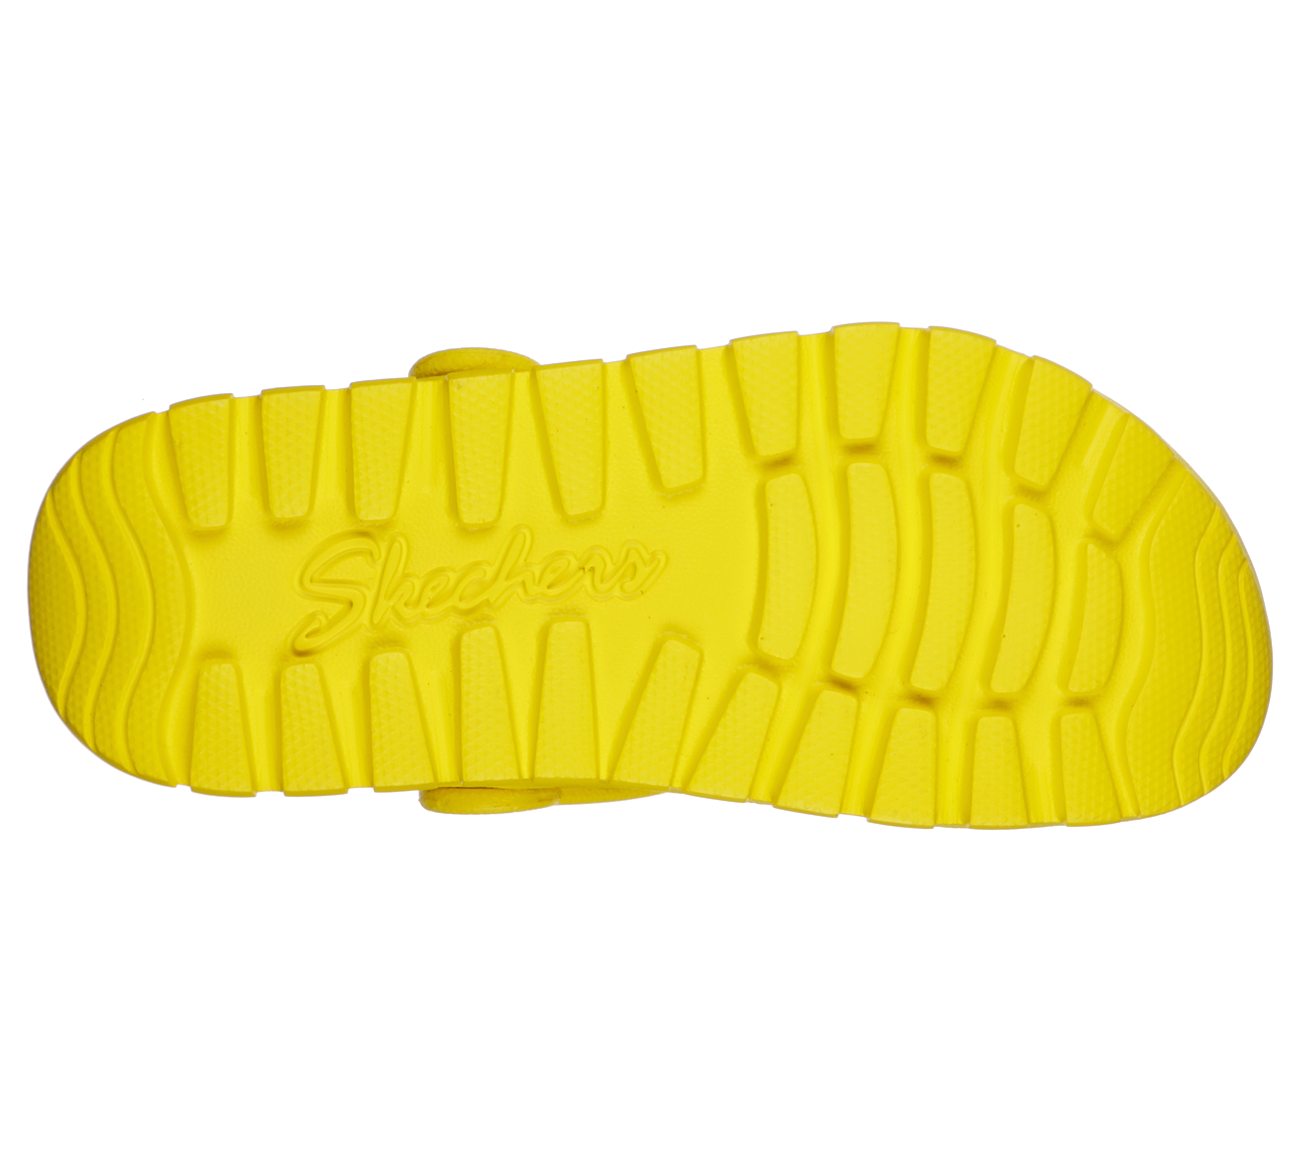 FOOTSTEPS - TRANSCEND, YELLOW Footwear Bottom View